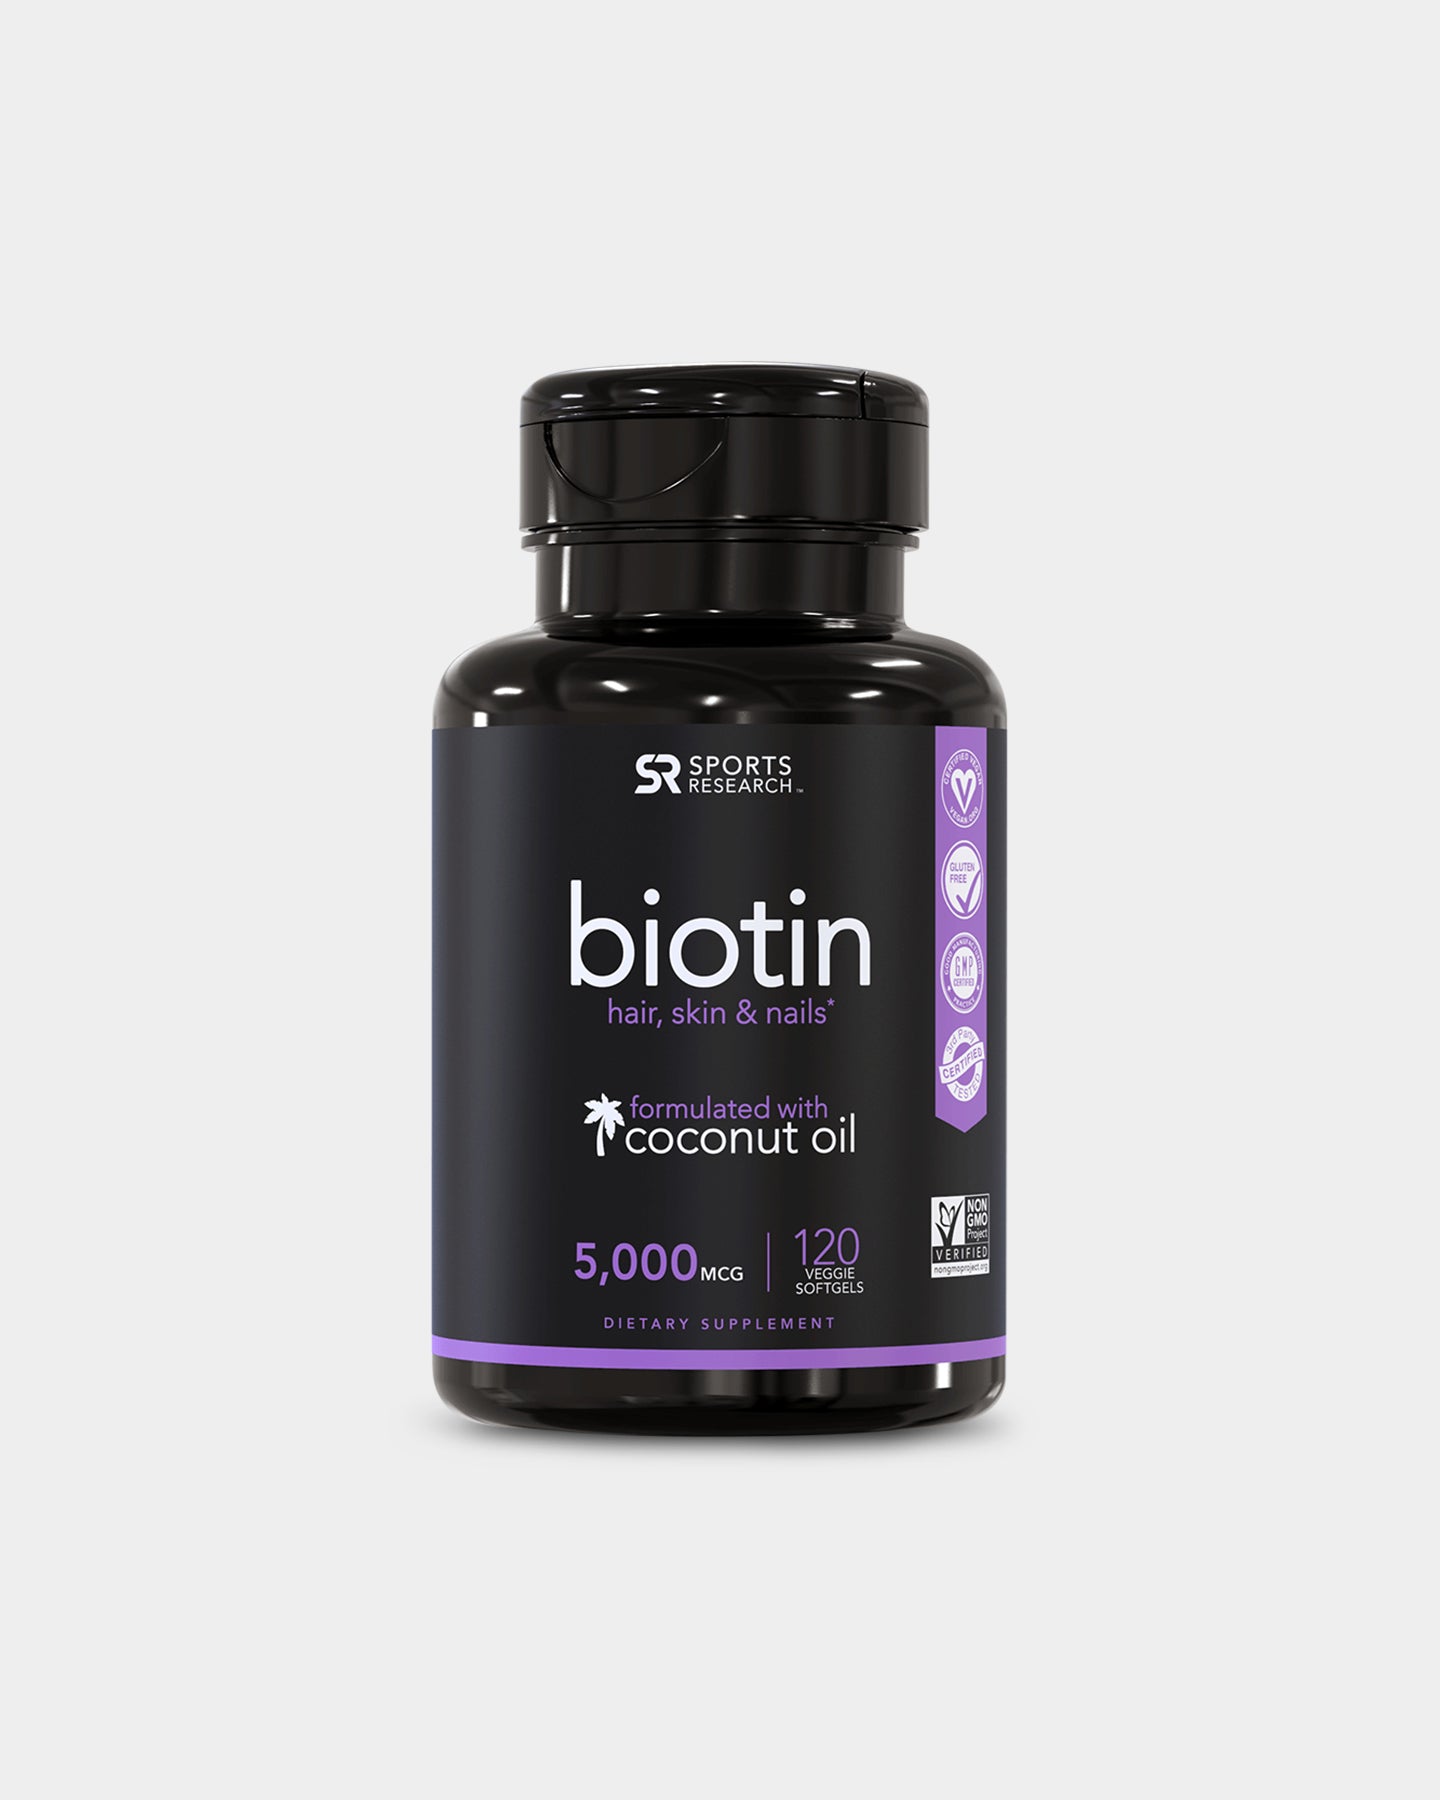 Image of Sports Research Biotin